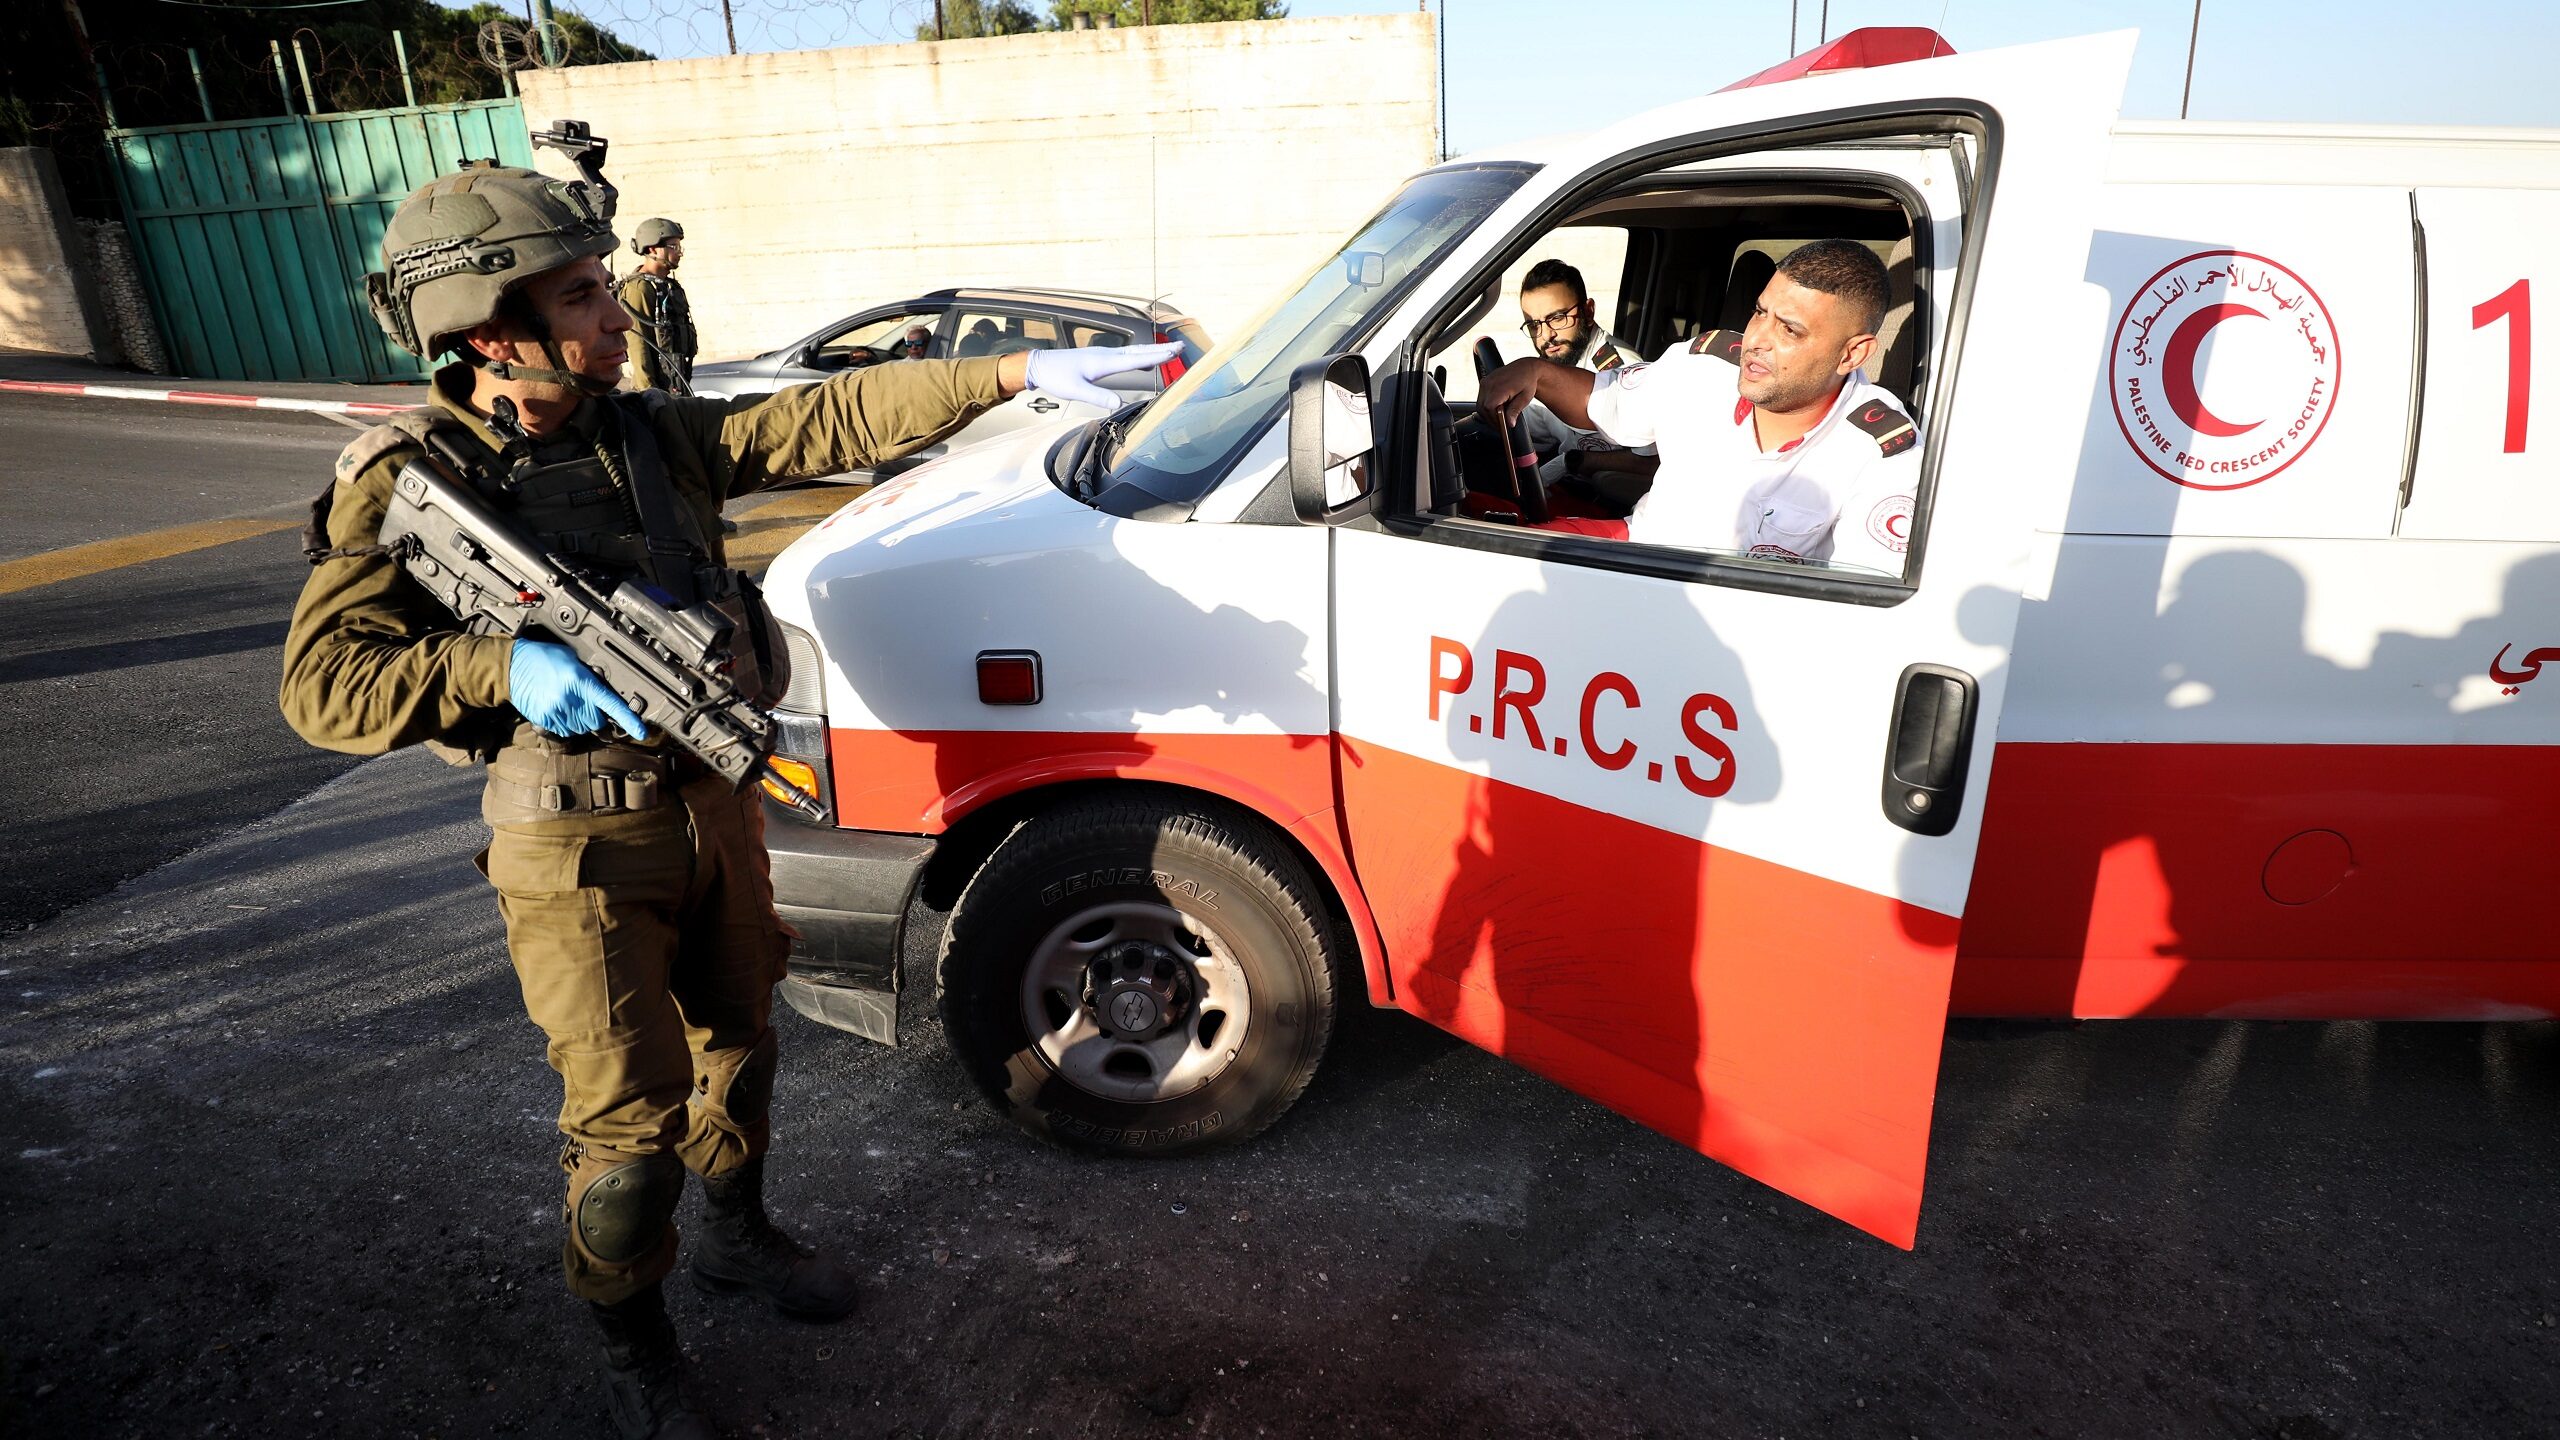 3 Palestinians Killed After Allegedly Opening Fire on Israeli Troops in Nablus